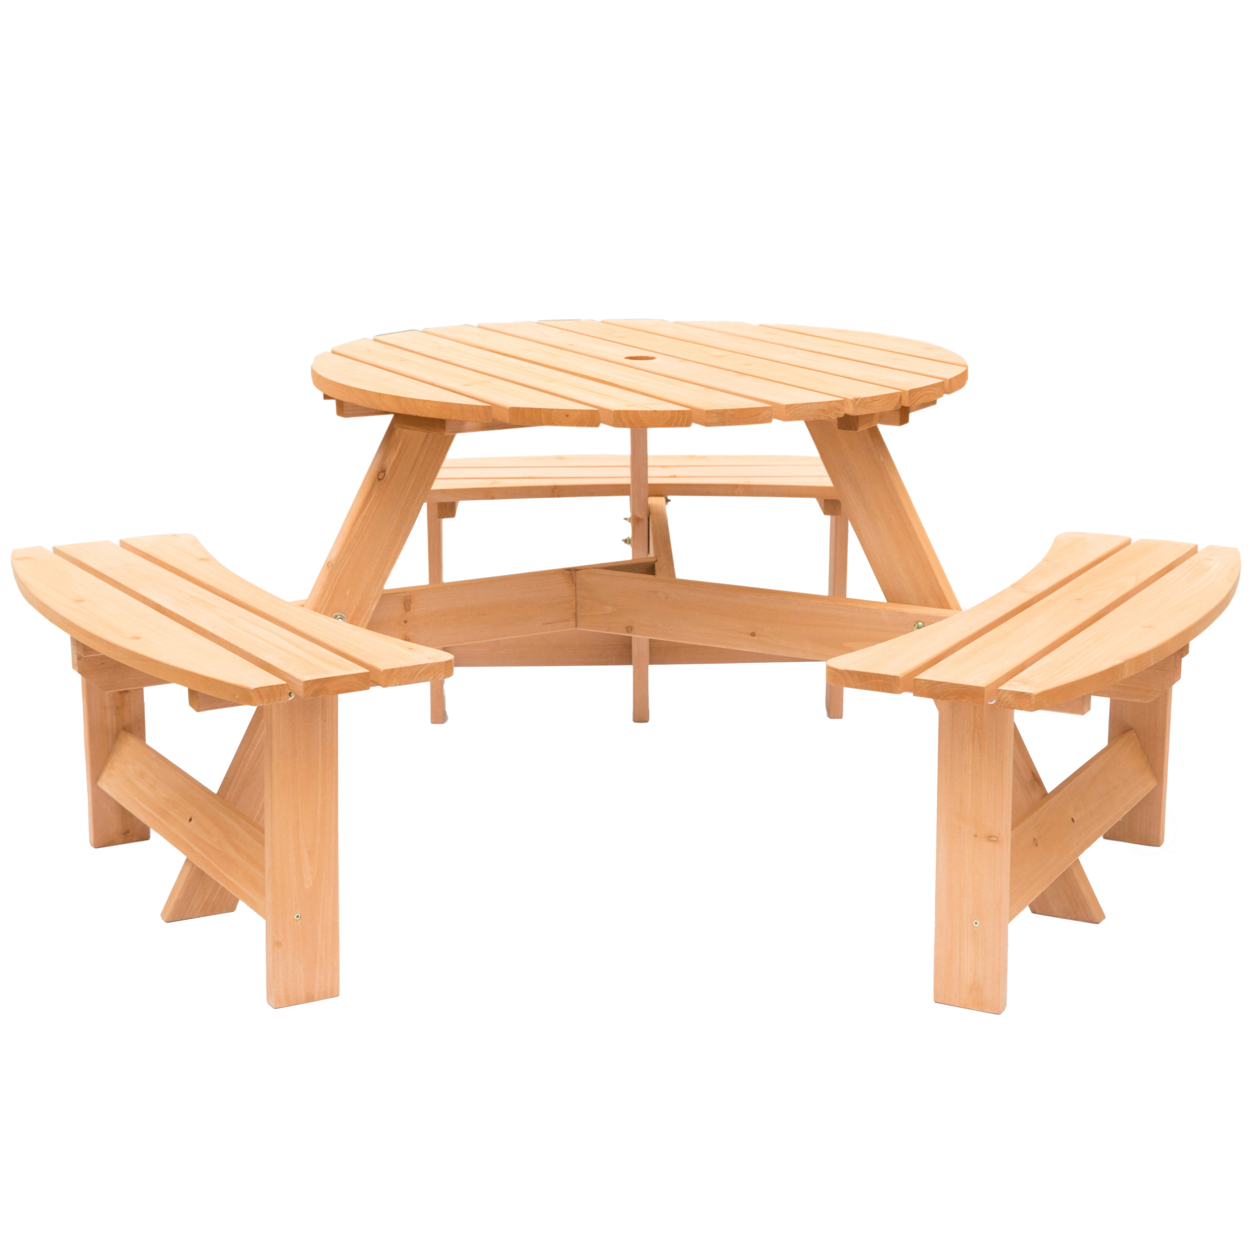 Wooden Outdoor Round Picnic Table With Bench For Patio, 6- Person With Umbrella Hole - Natural